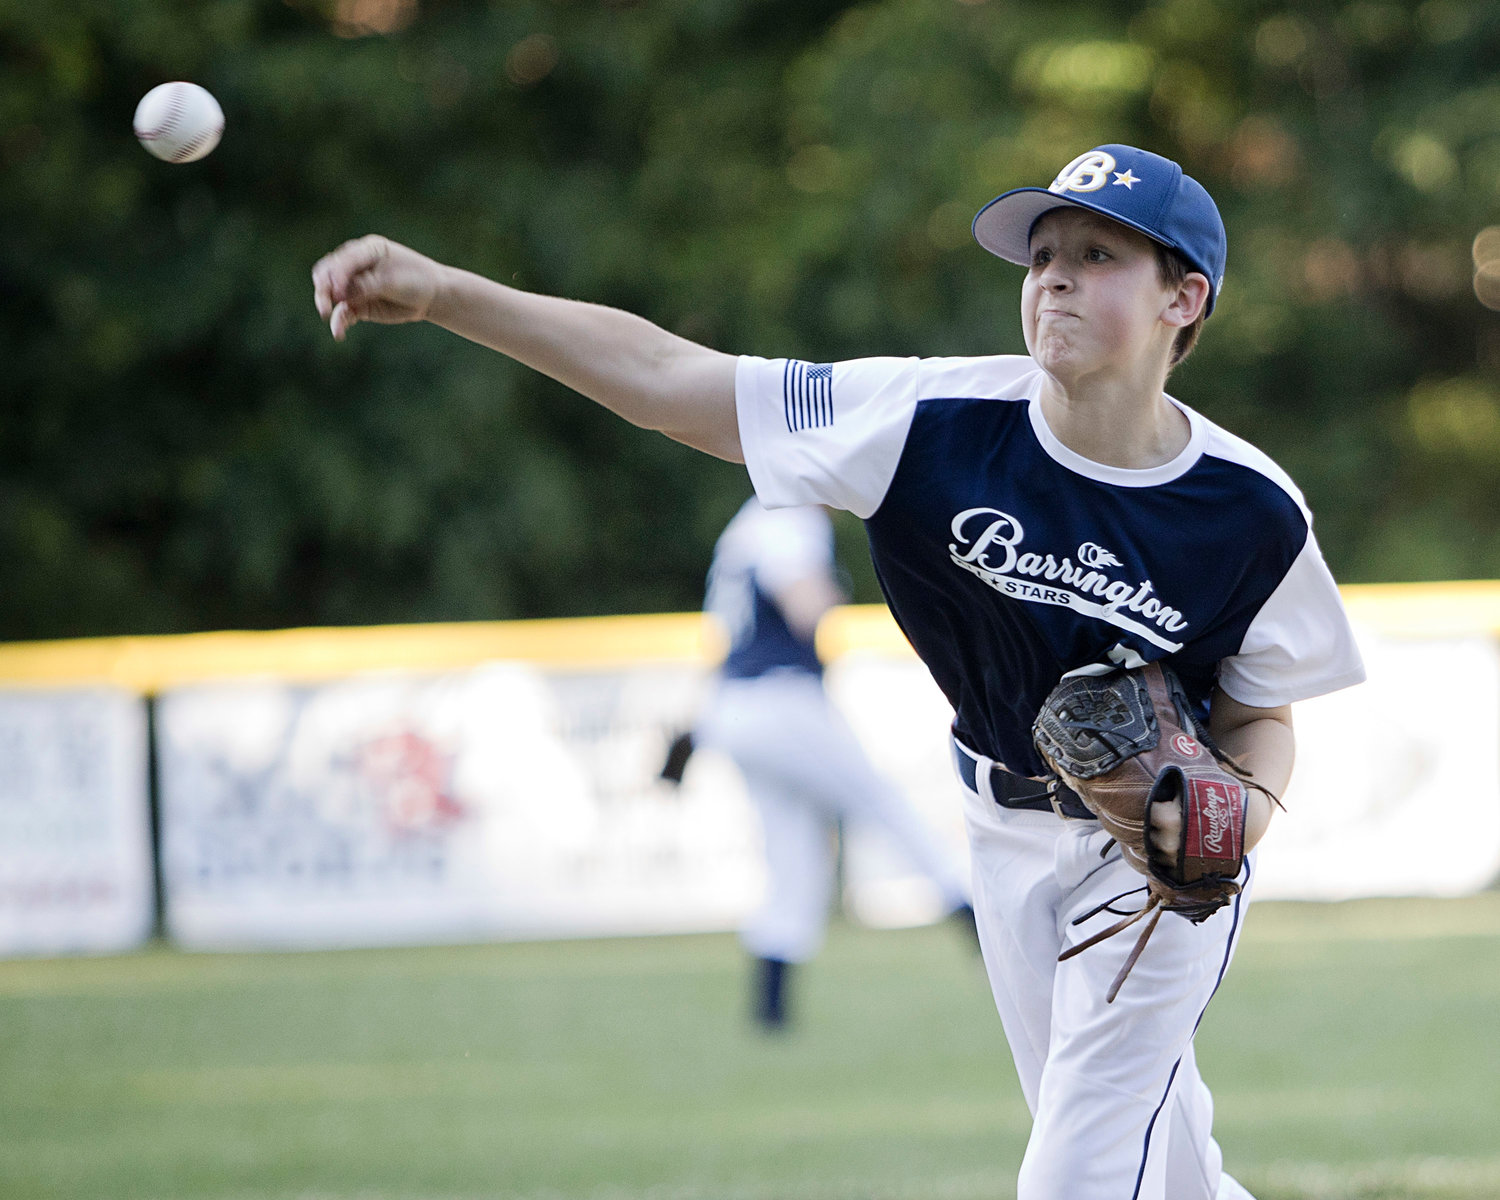 Tommy Coutant fires a pitch to an East Providence batter while competing in the 12U All-Star playoffs, Saturday.